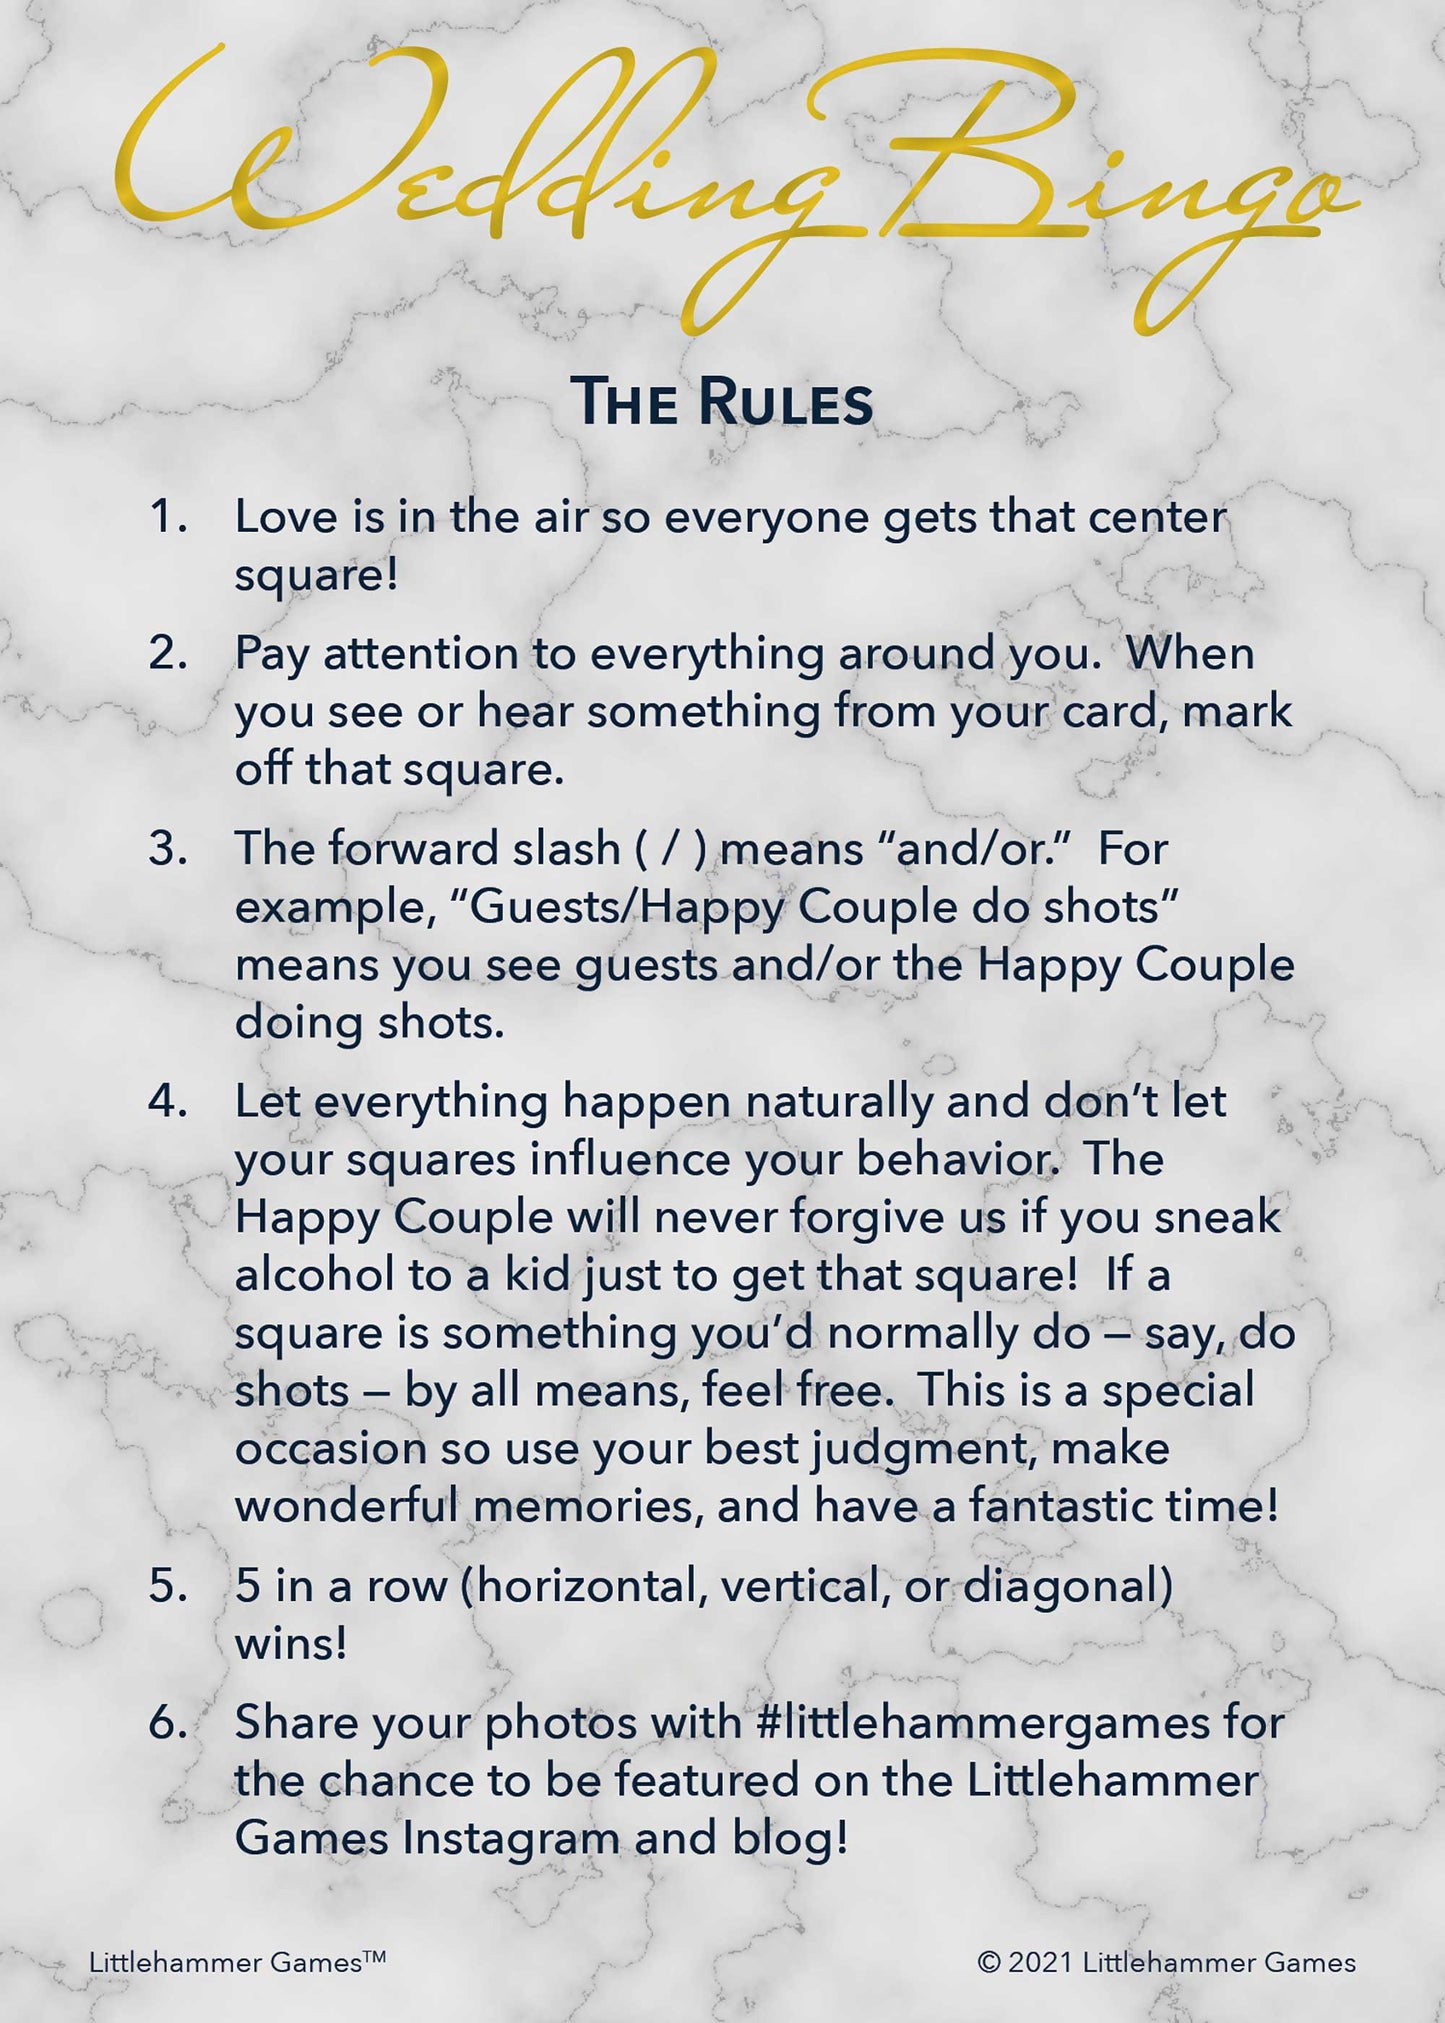 Wedding Bingo rules card on a gold and marble background